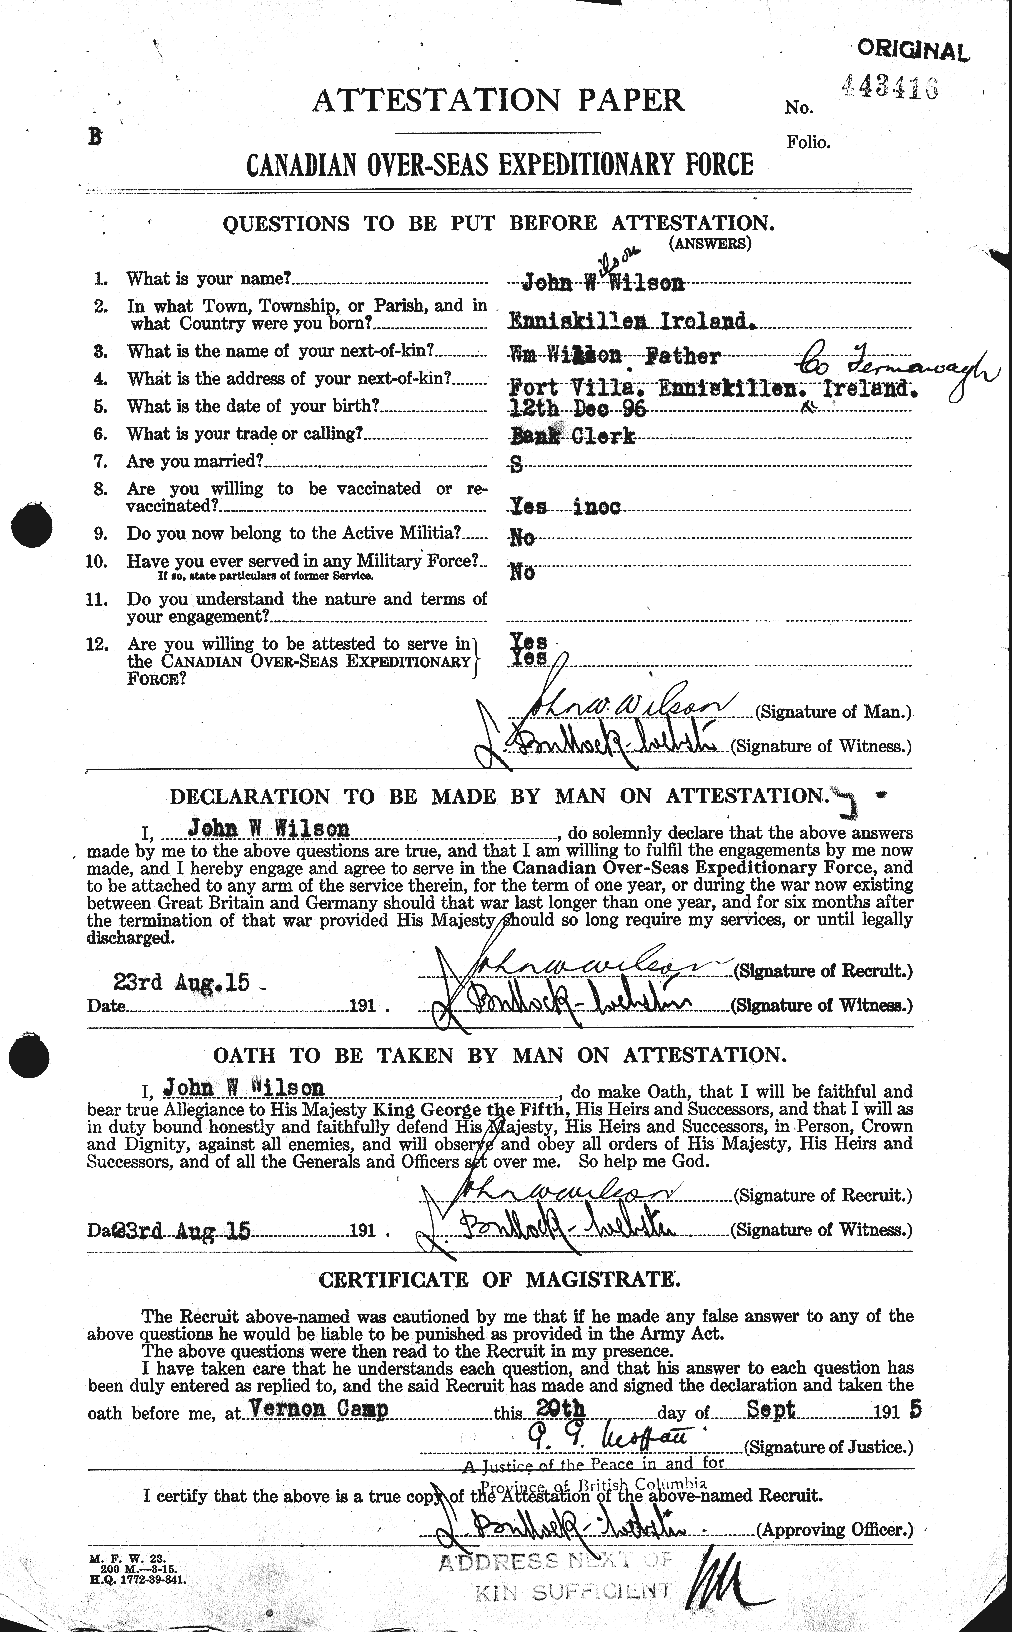 Personnel Records of the First World War - CEF 678538a